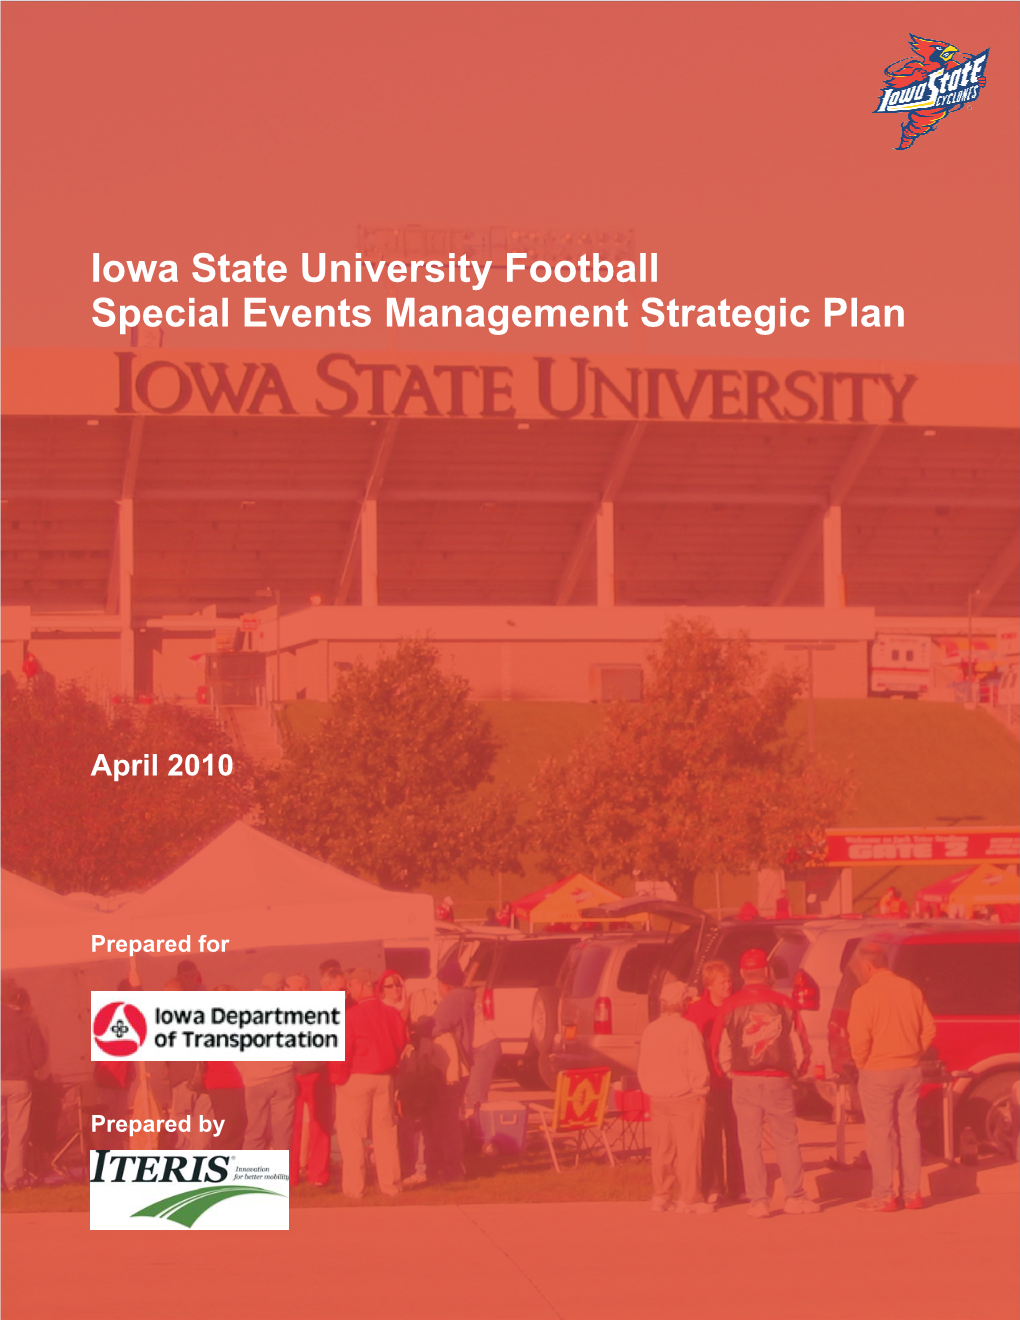 Iowa State University Football Special Events Management Strategic Plan